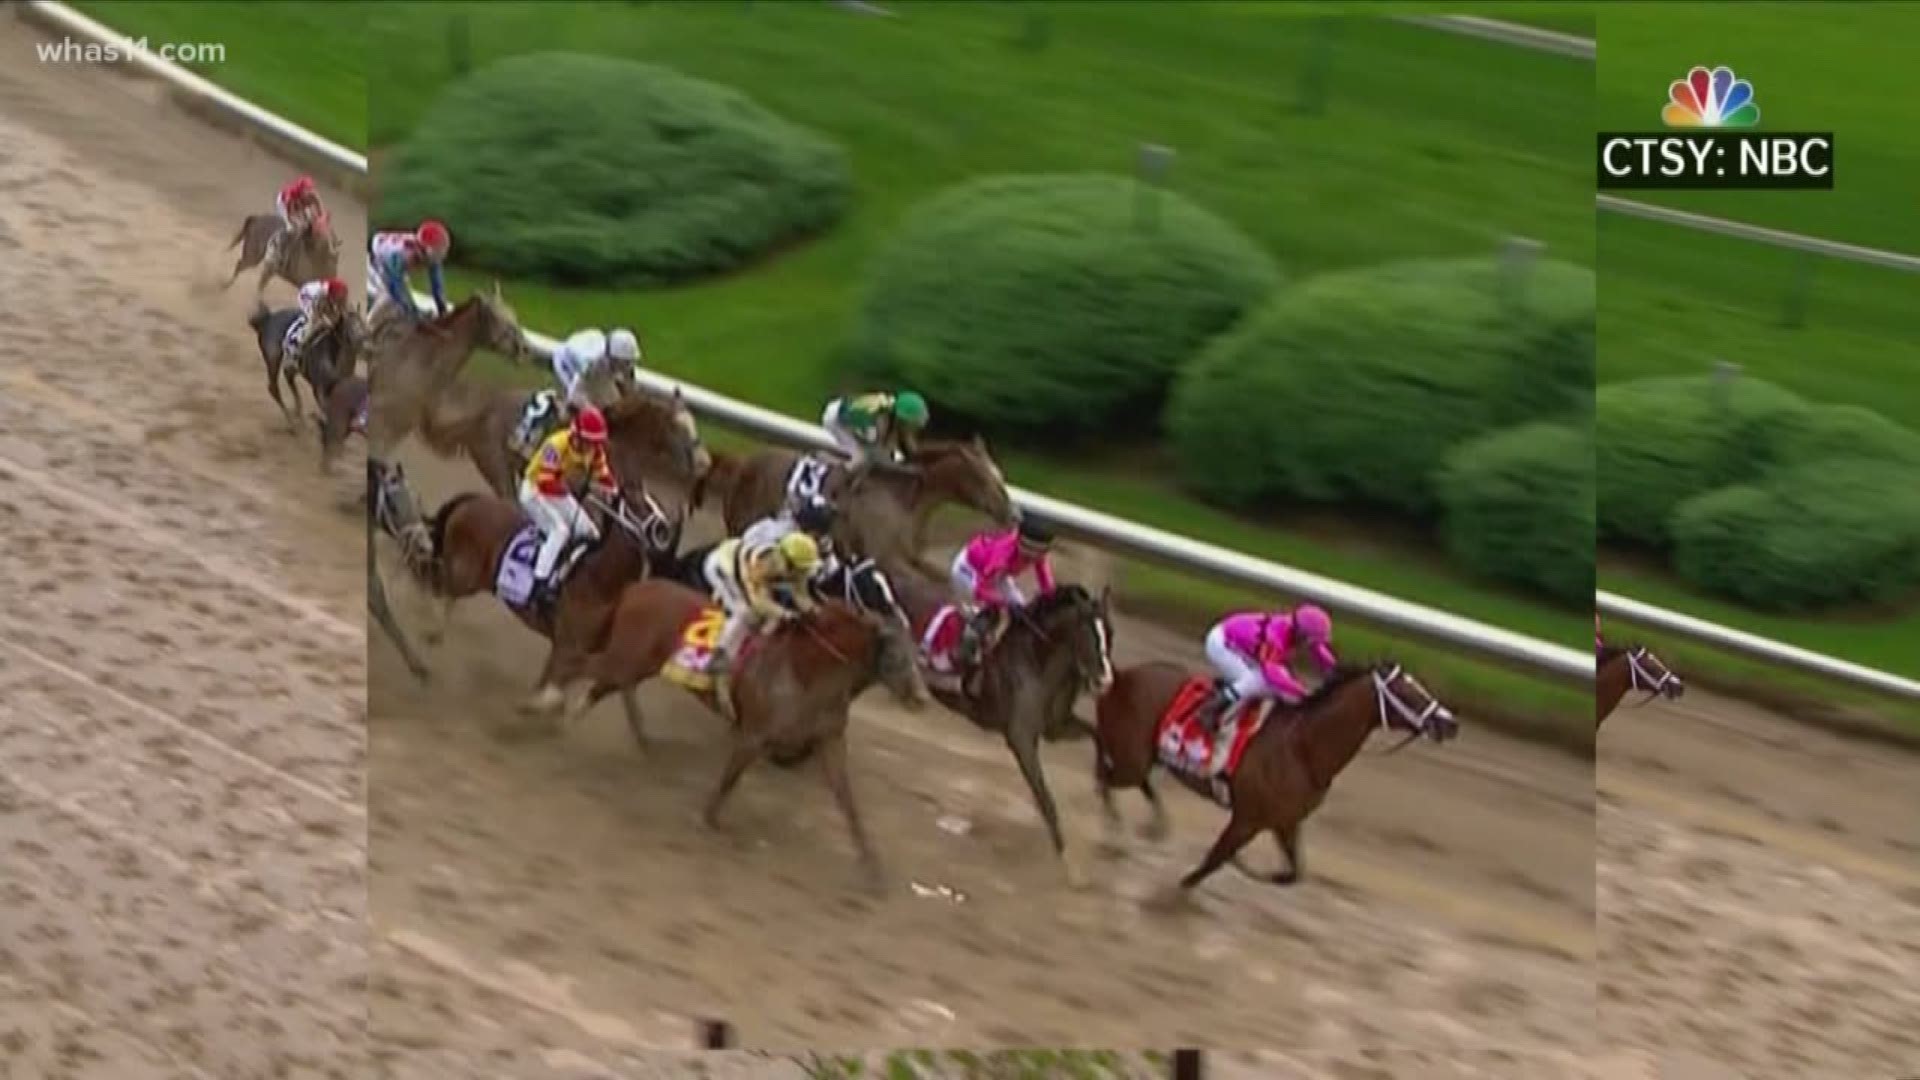 WHAS11's Whitney Harding explained how Maximum Security interfered with other horses during the Kentucky Derby, disqualifying him and crowning Country House the winner.